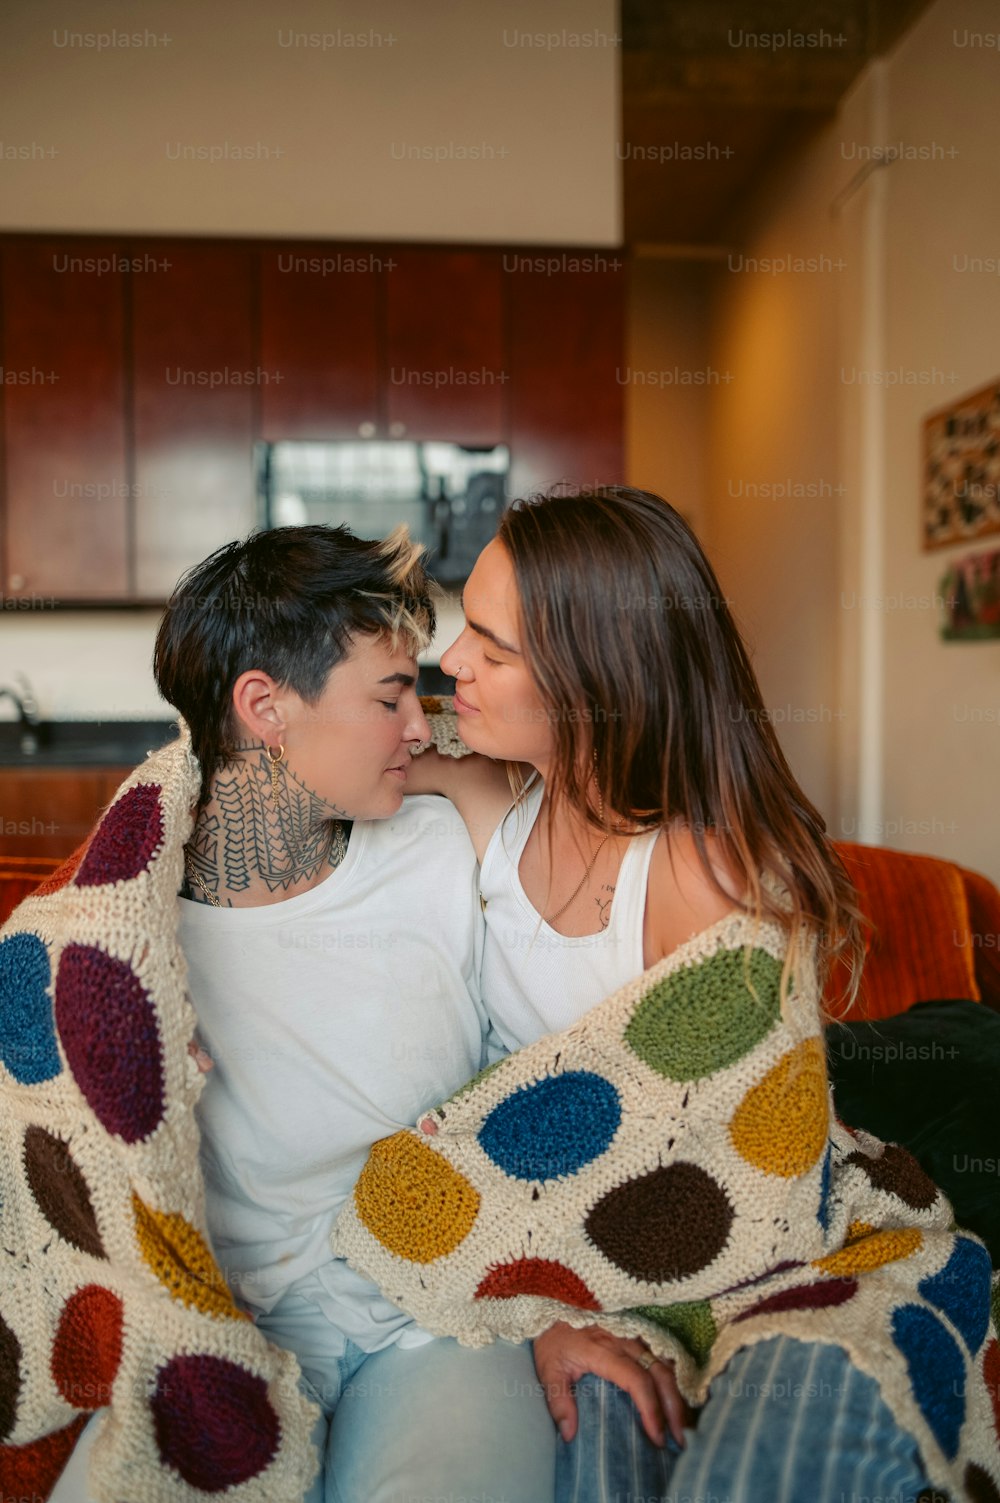 a man and woman sitting on a couch under a blanket